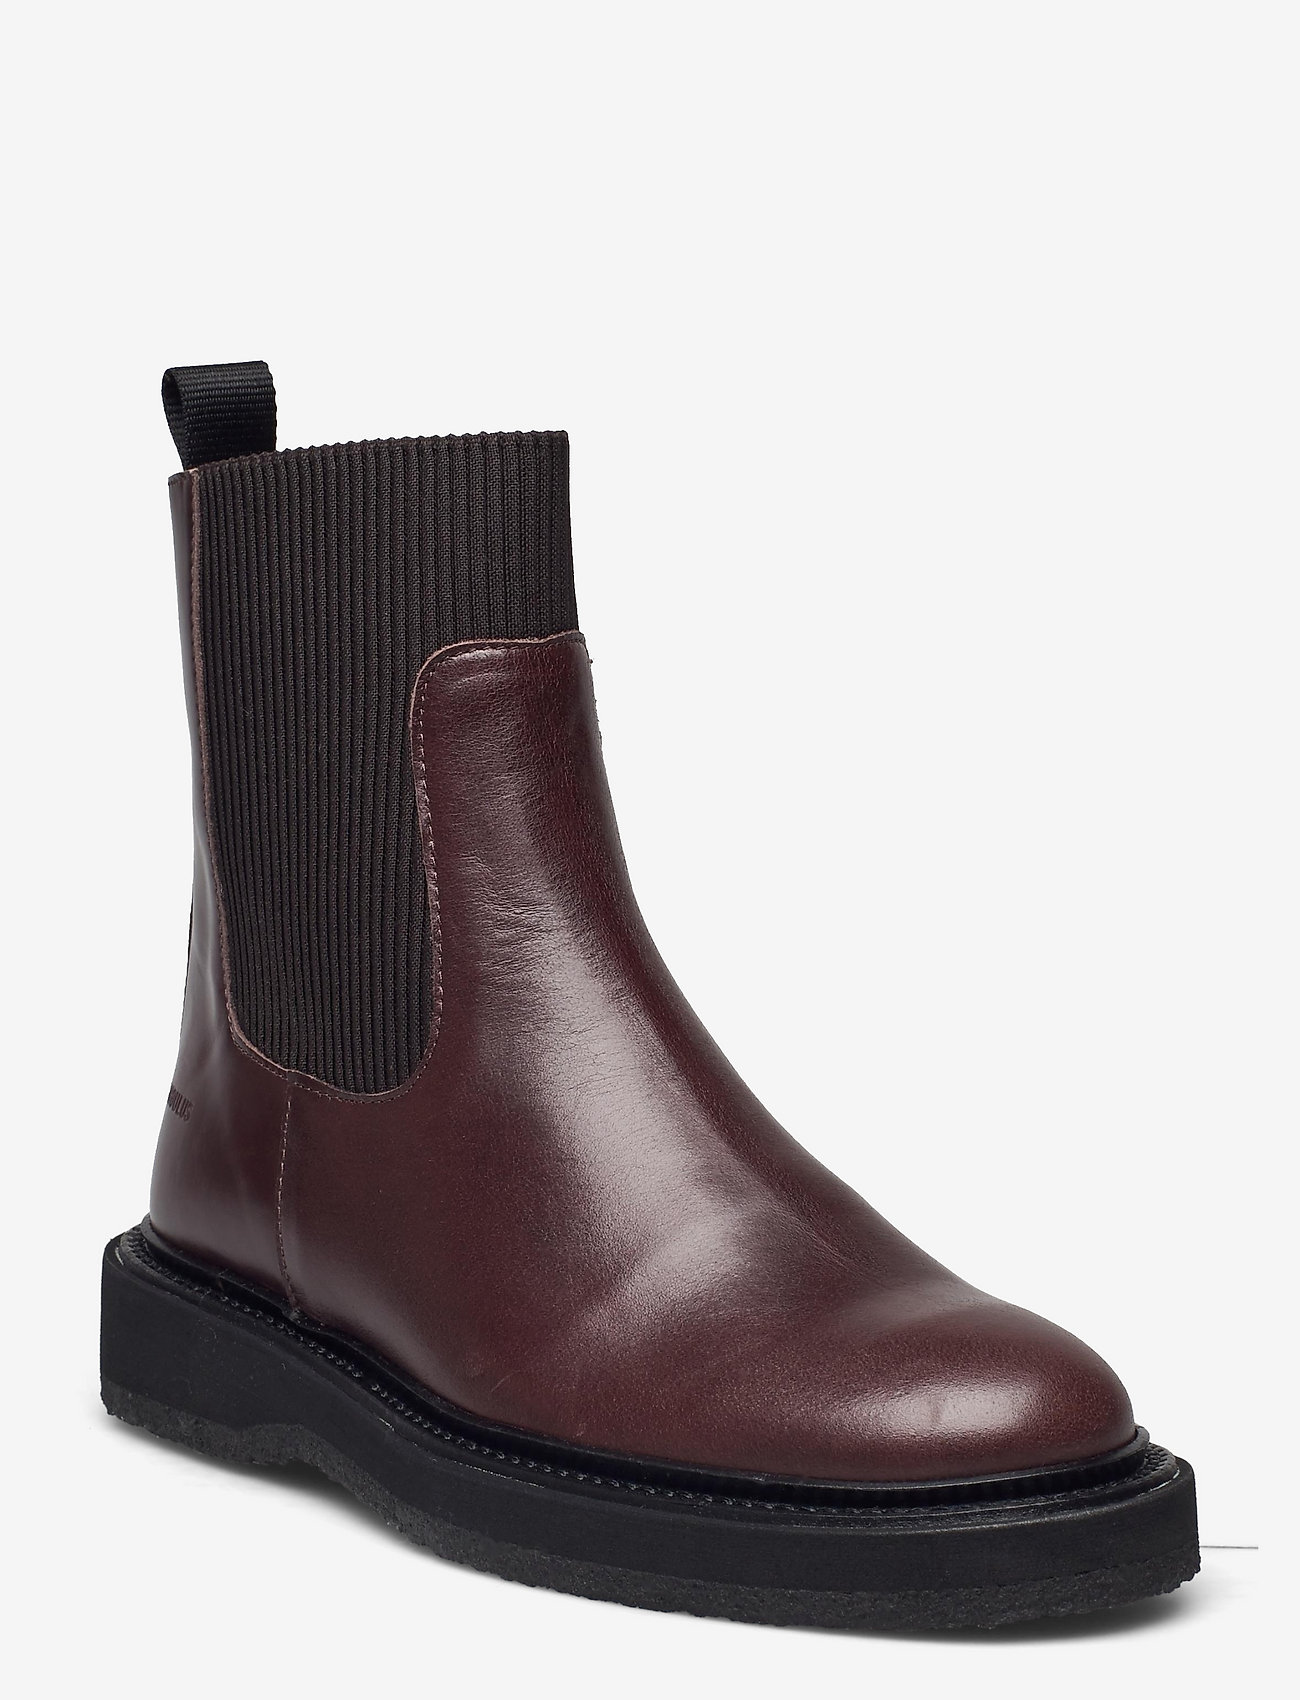 Booties - Flat - With - Chelsea boots | Boozt.com